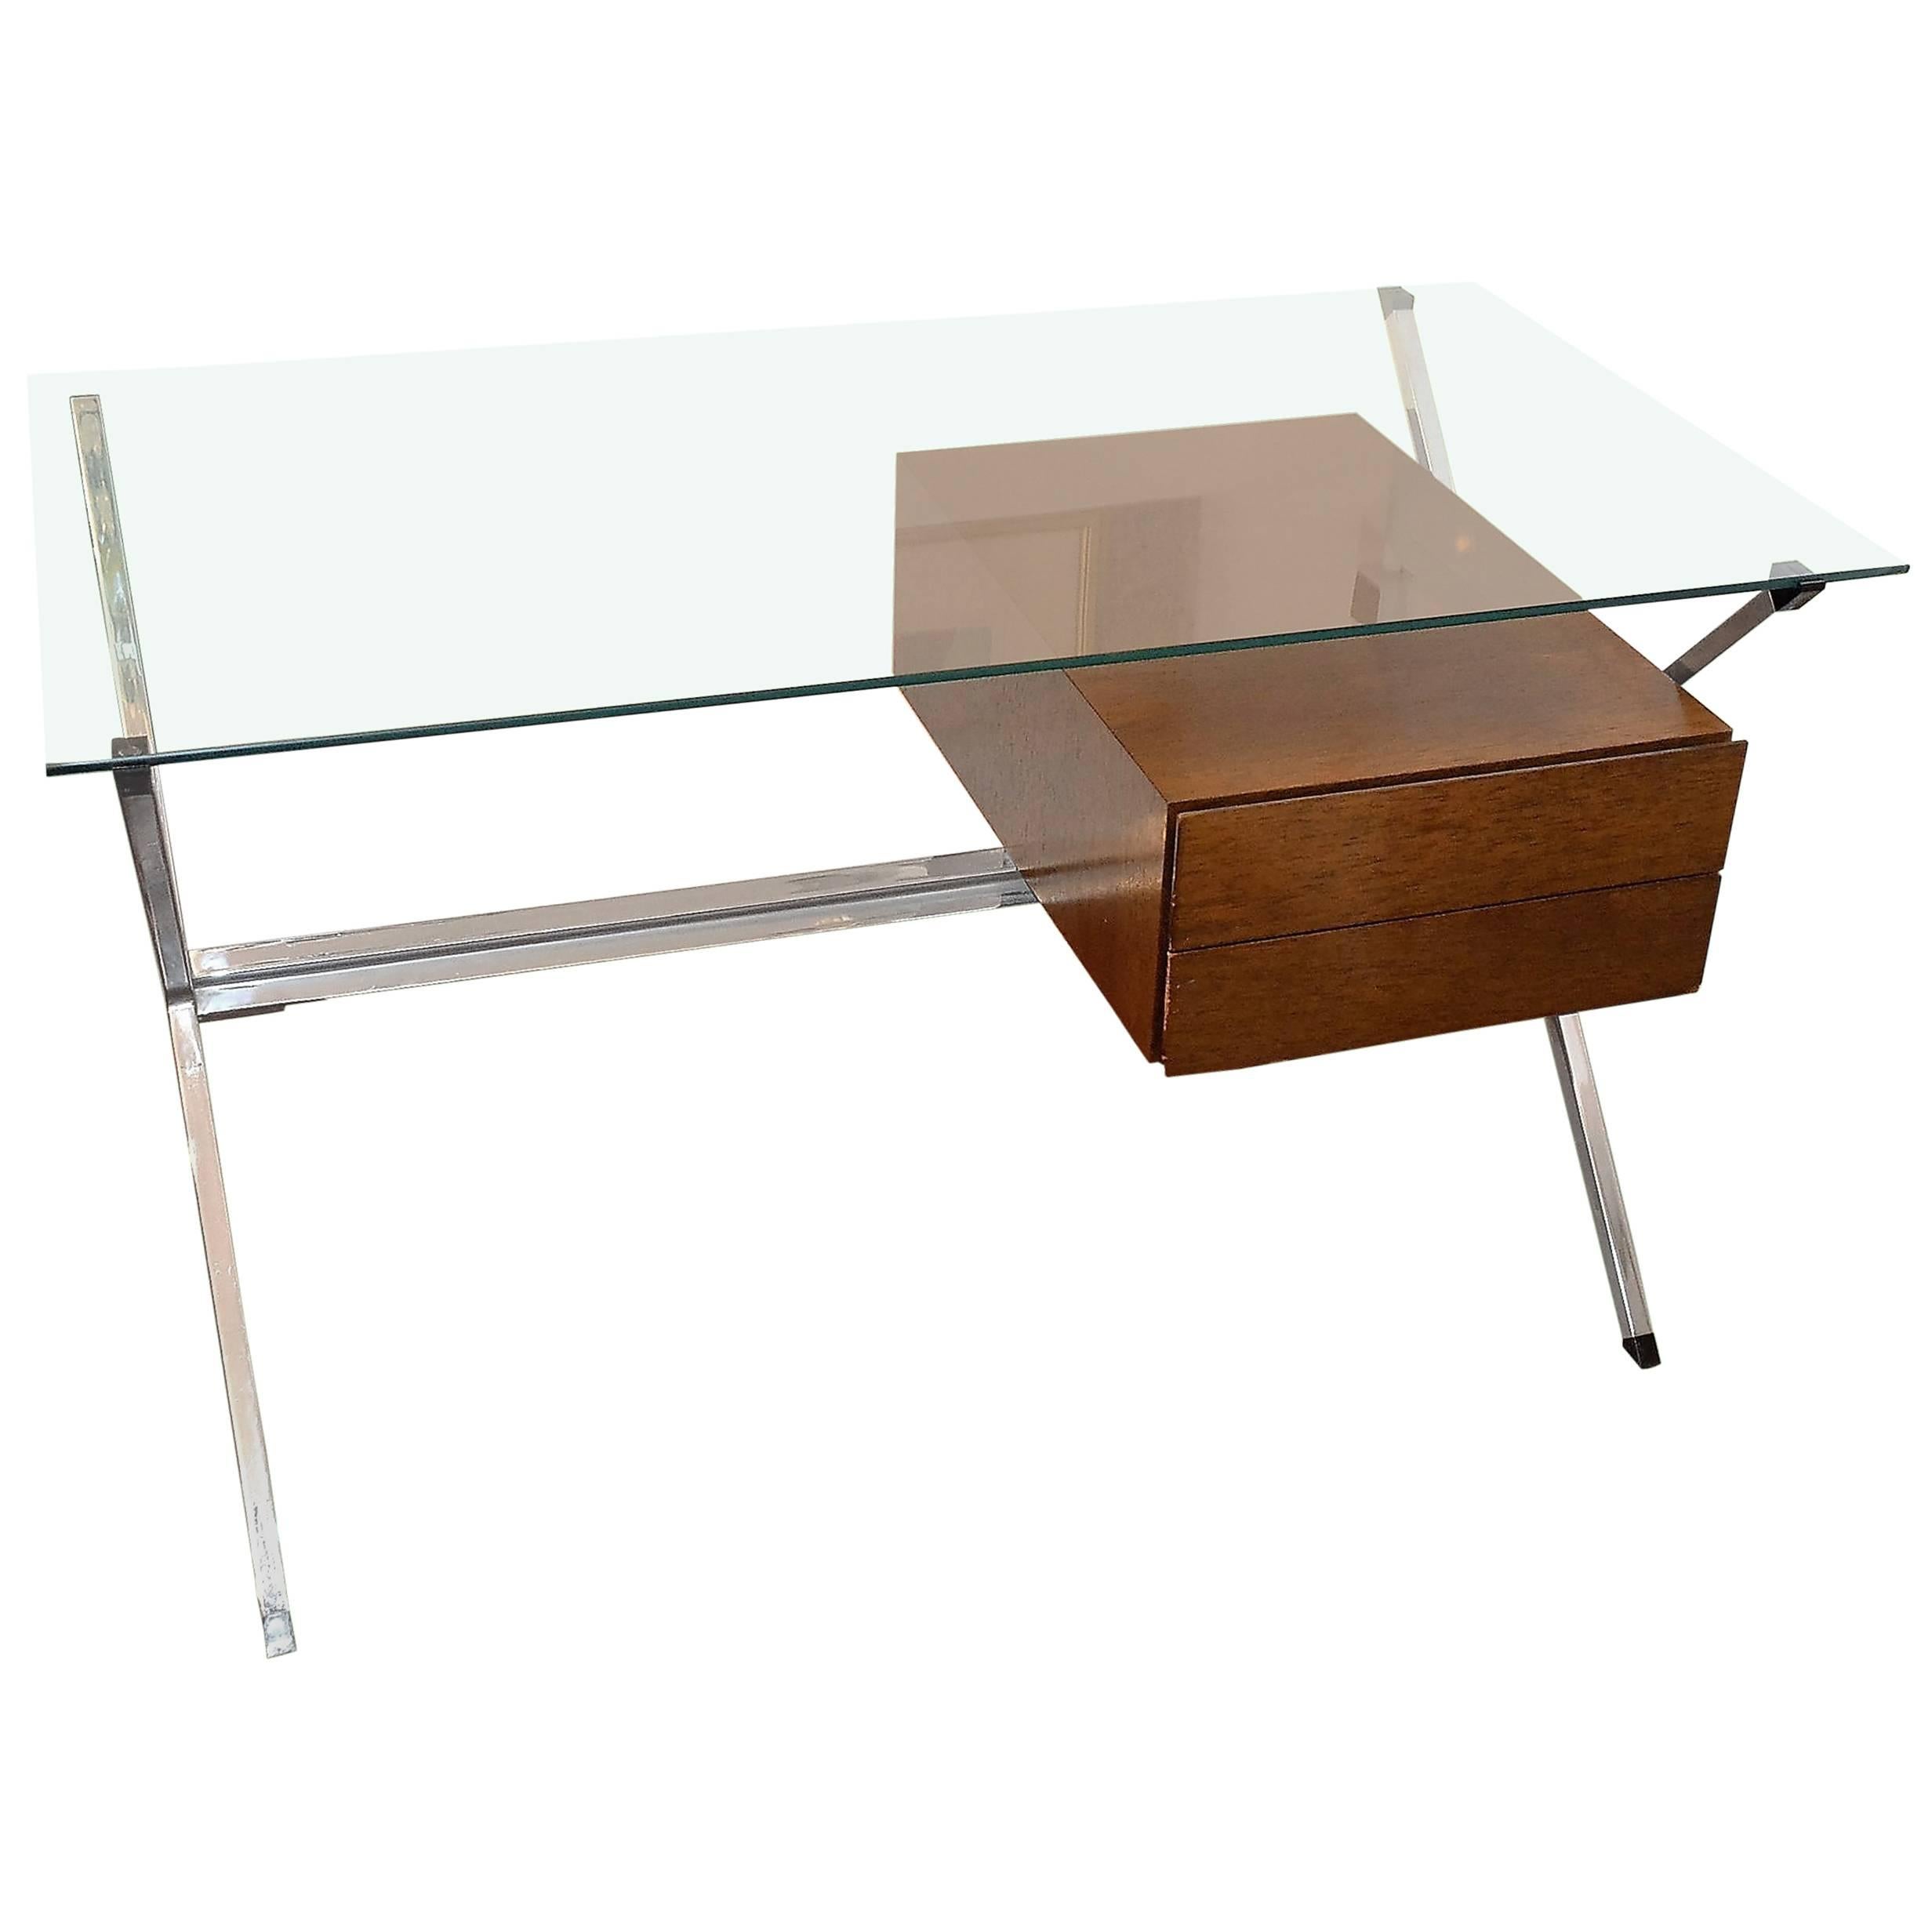 Desk in Teak, Glass and Chrome Steel by Franco Albini for Knoll, 1970